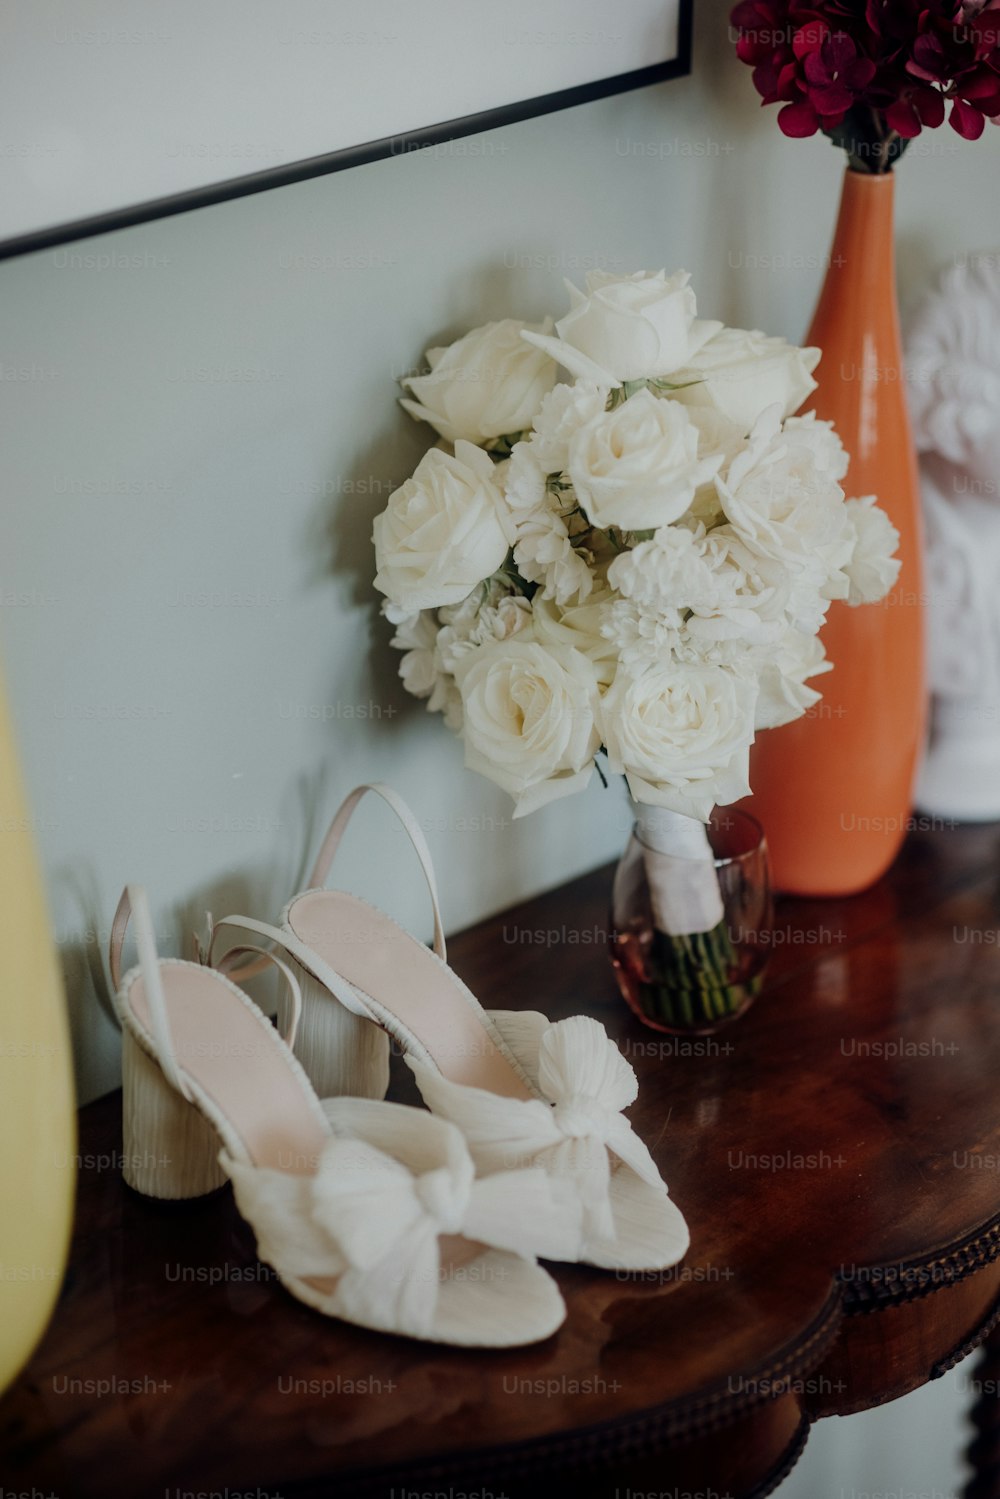 a pair of white shoes sitting on a table next to a vase of flowers